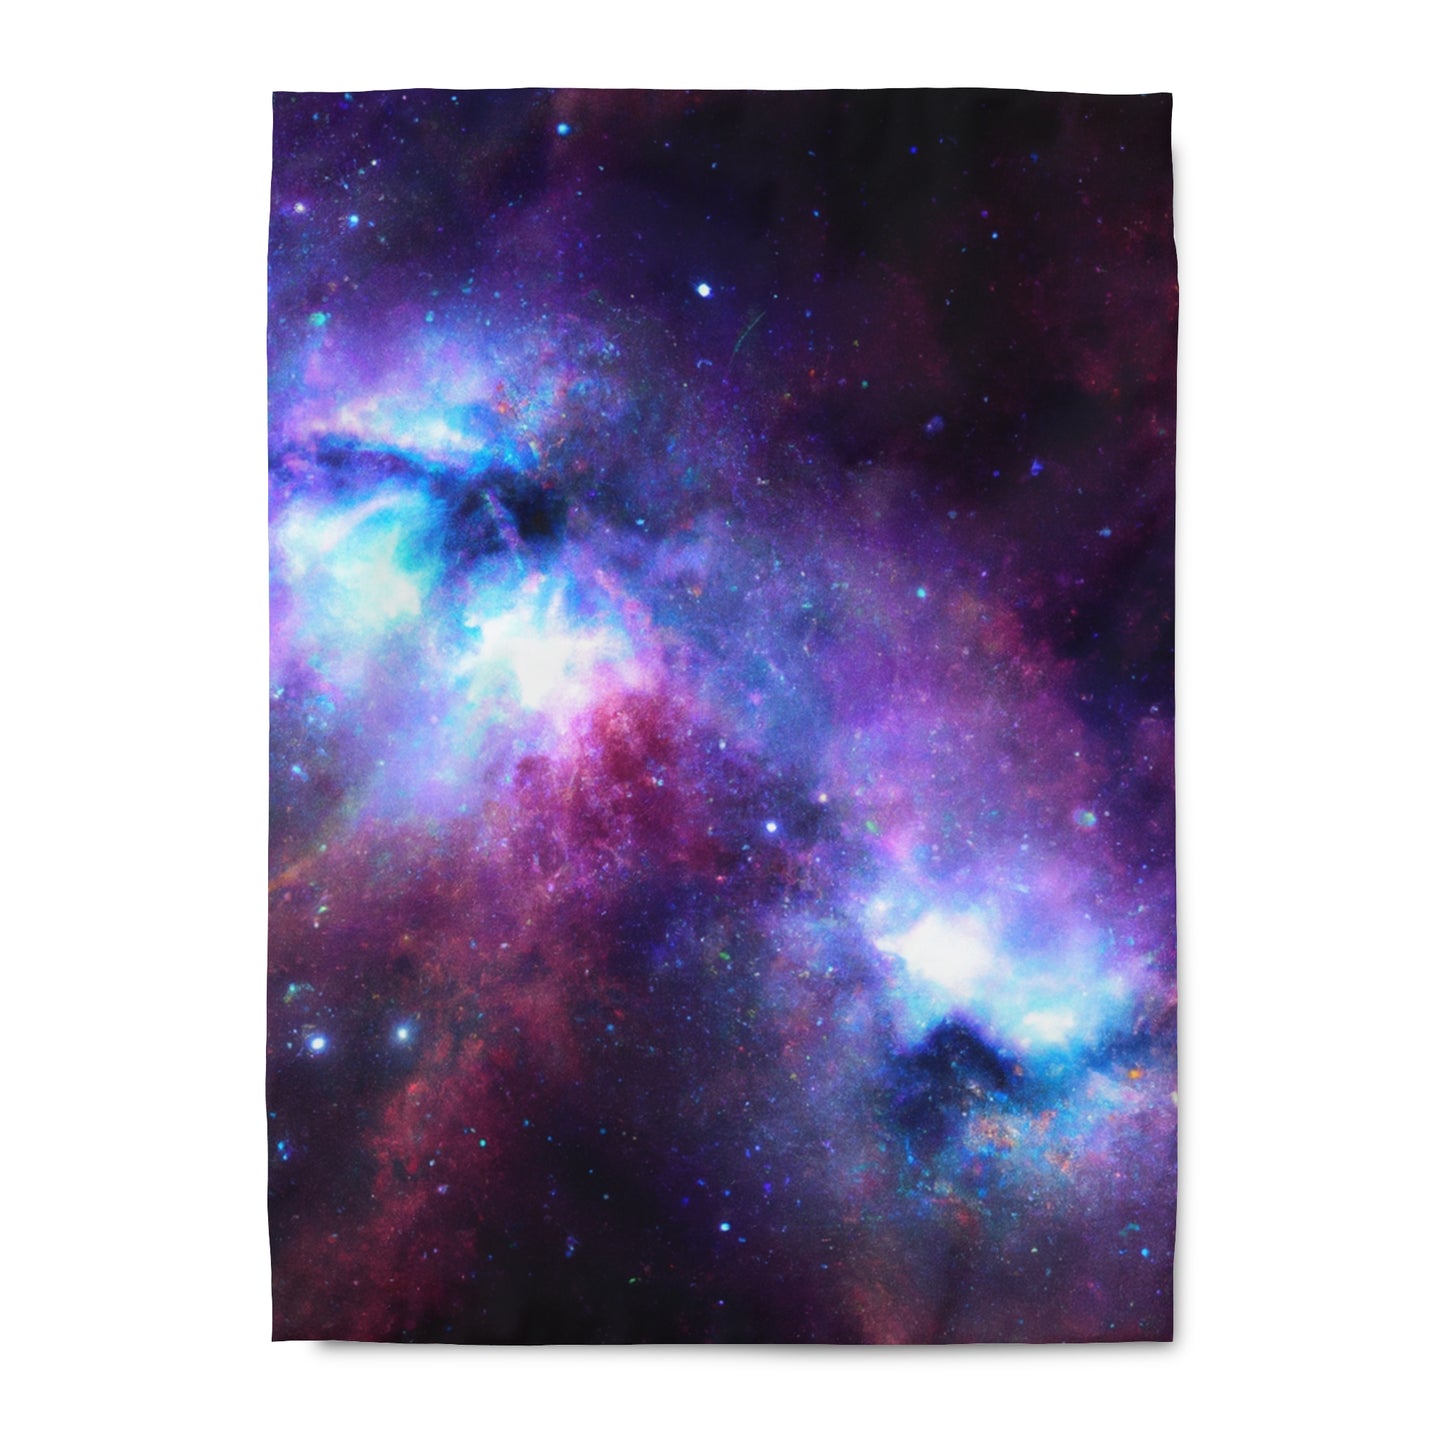 The Dream of Peter Pinkerton - Astronomy Duvet Bed Cover